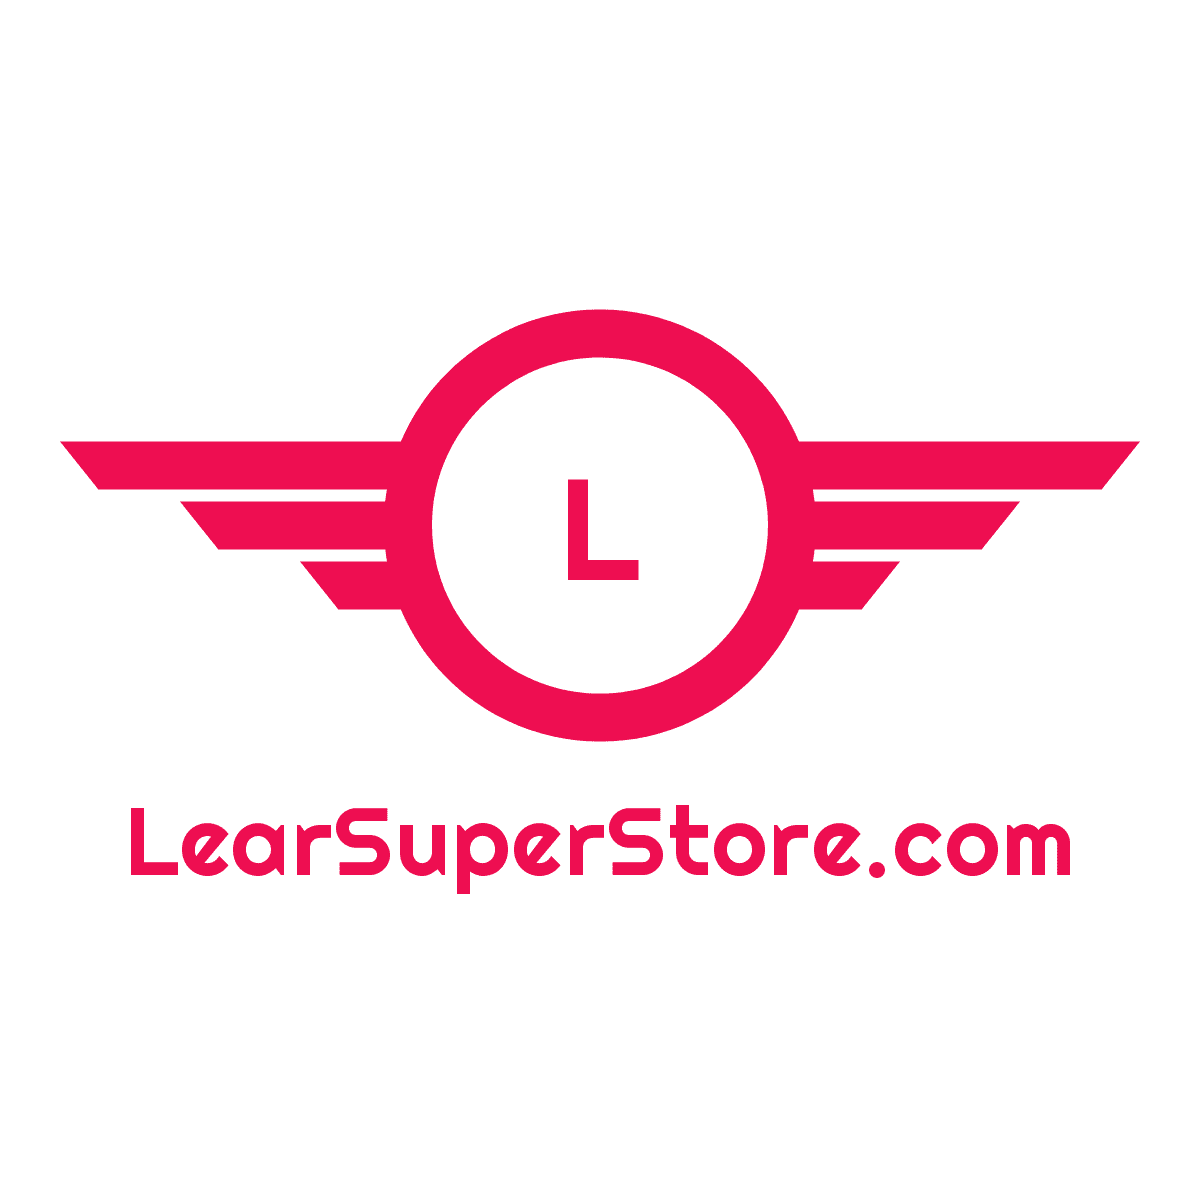 Lear SuperStore